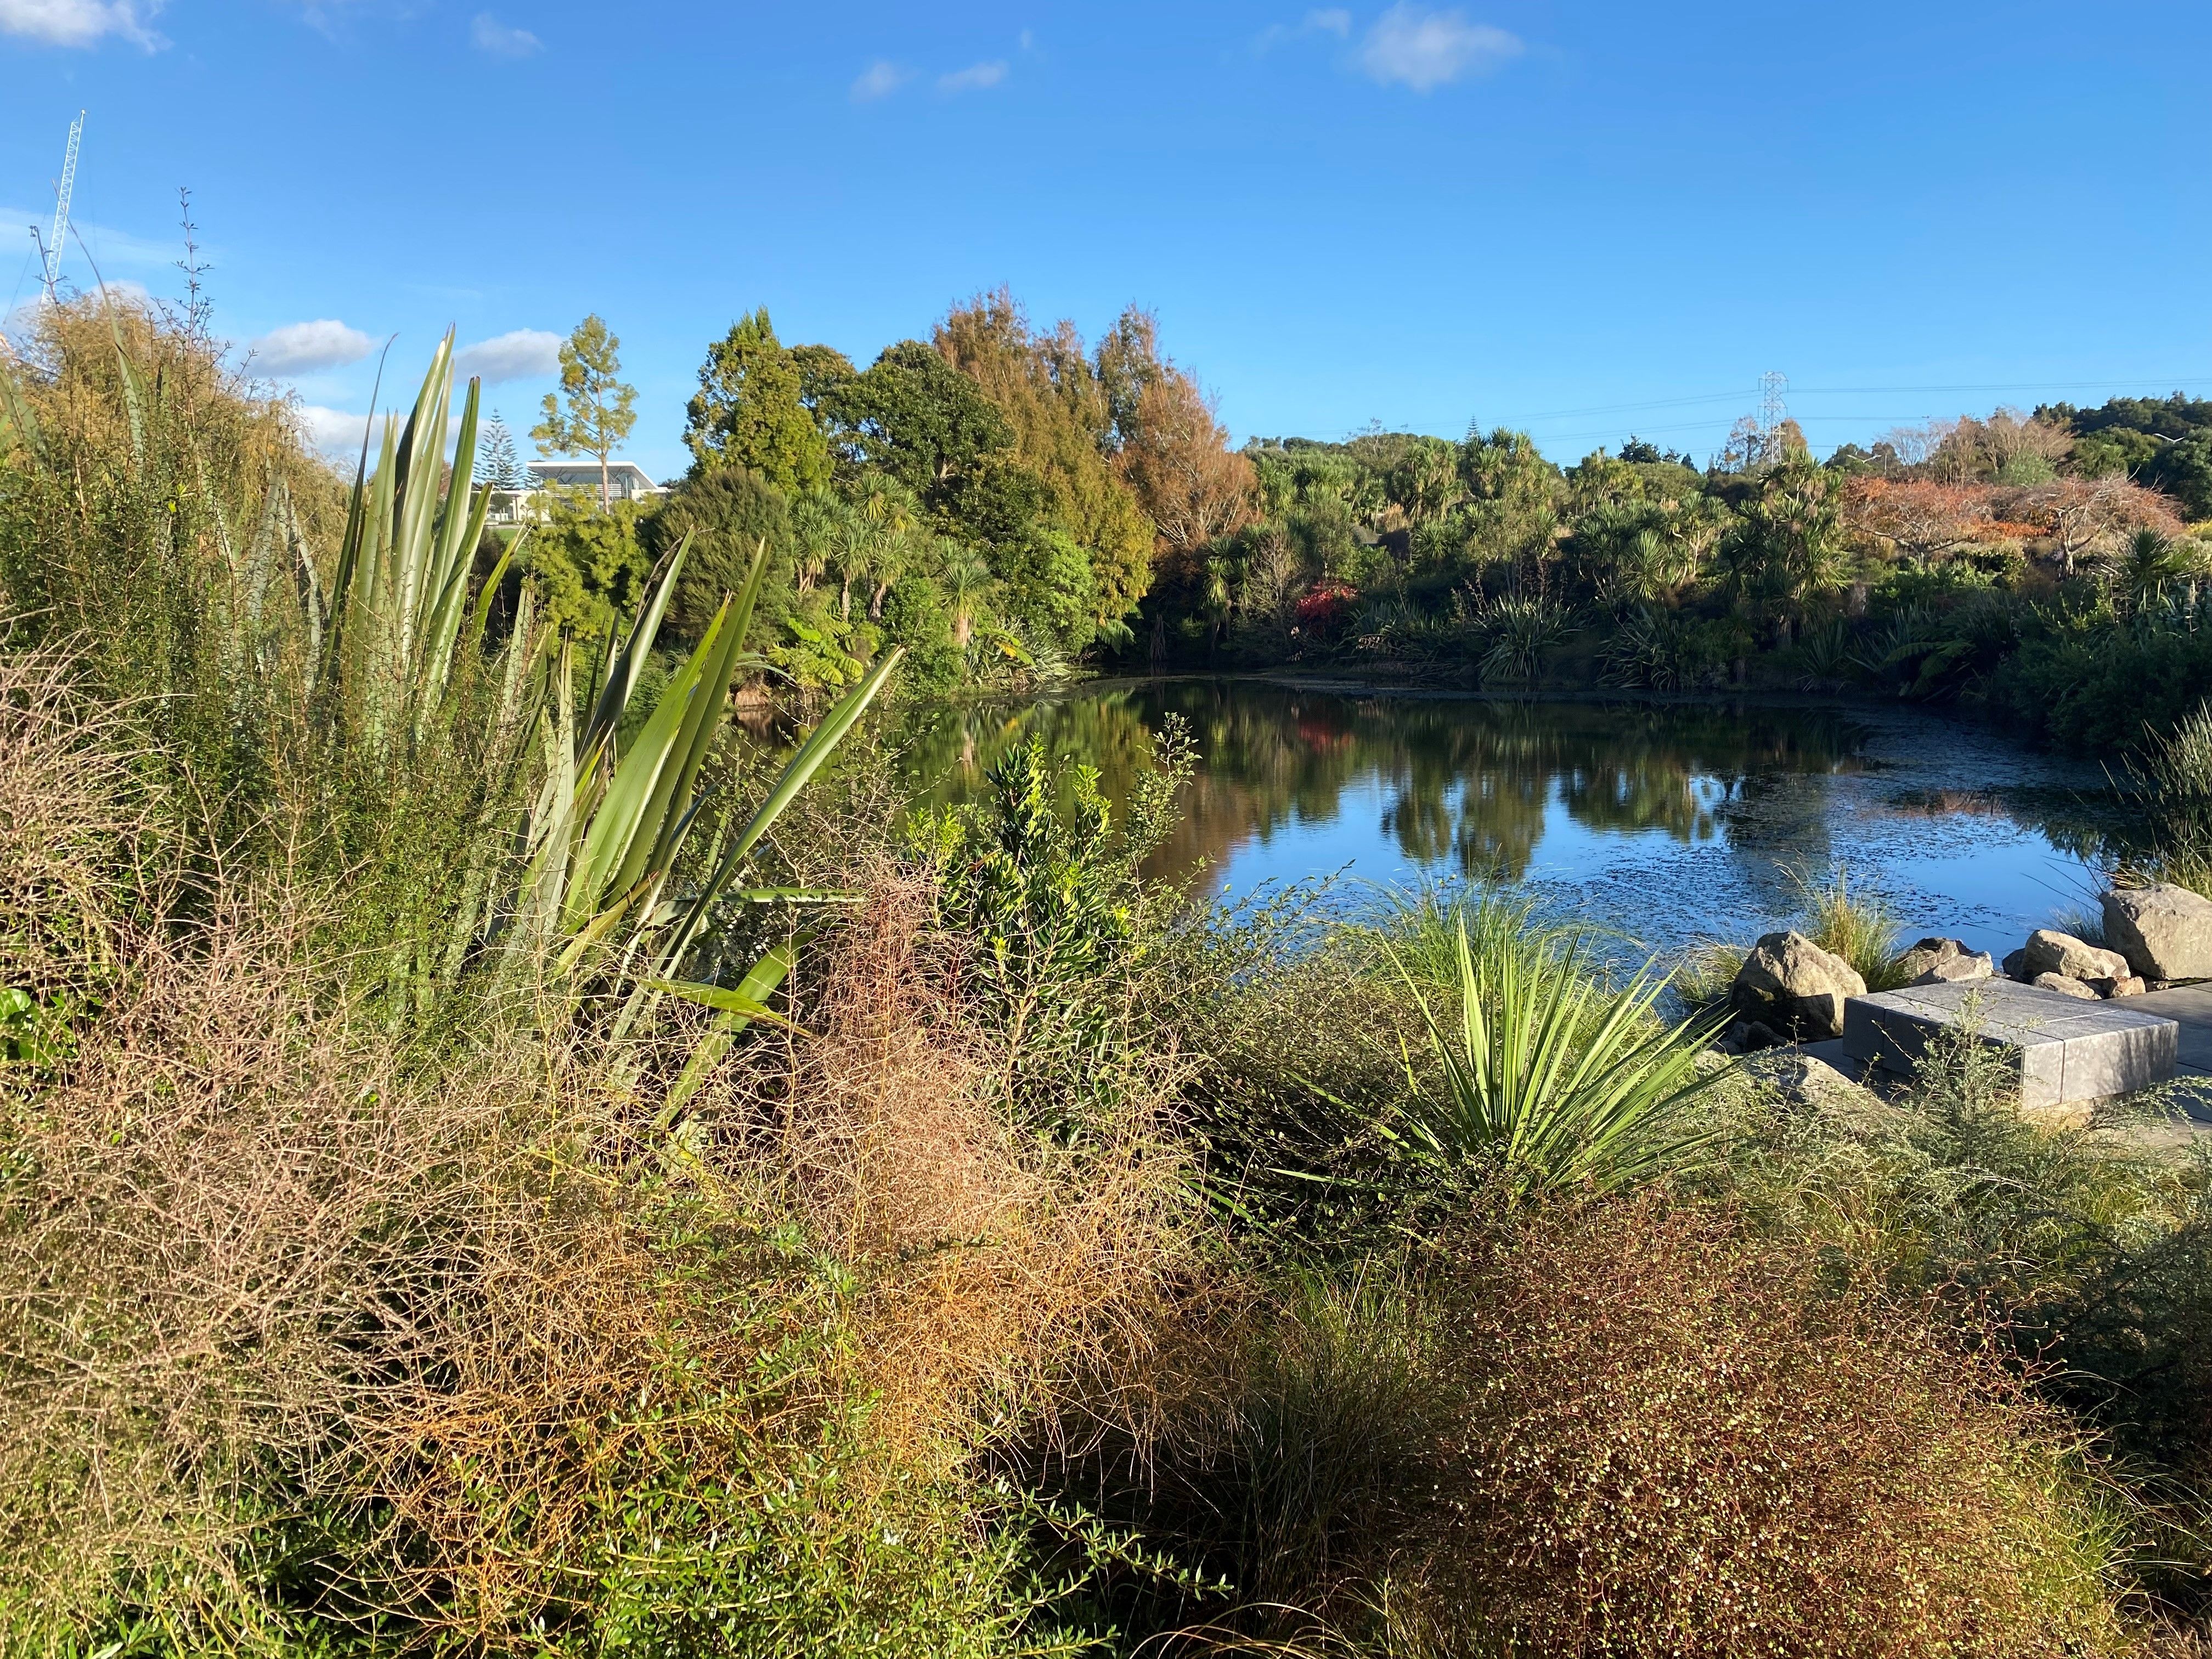 Vegetation and pond with blue sky